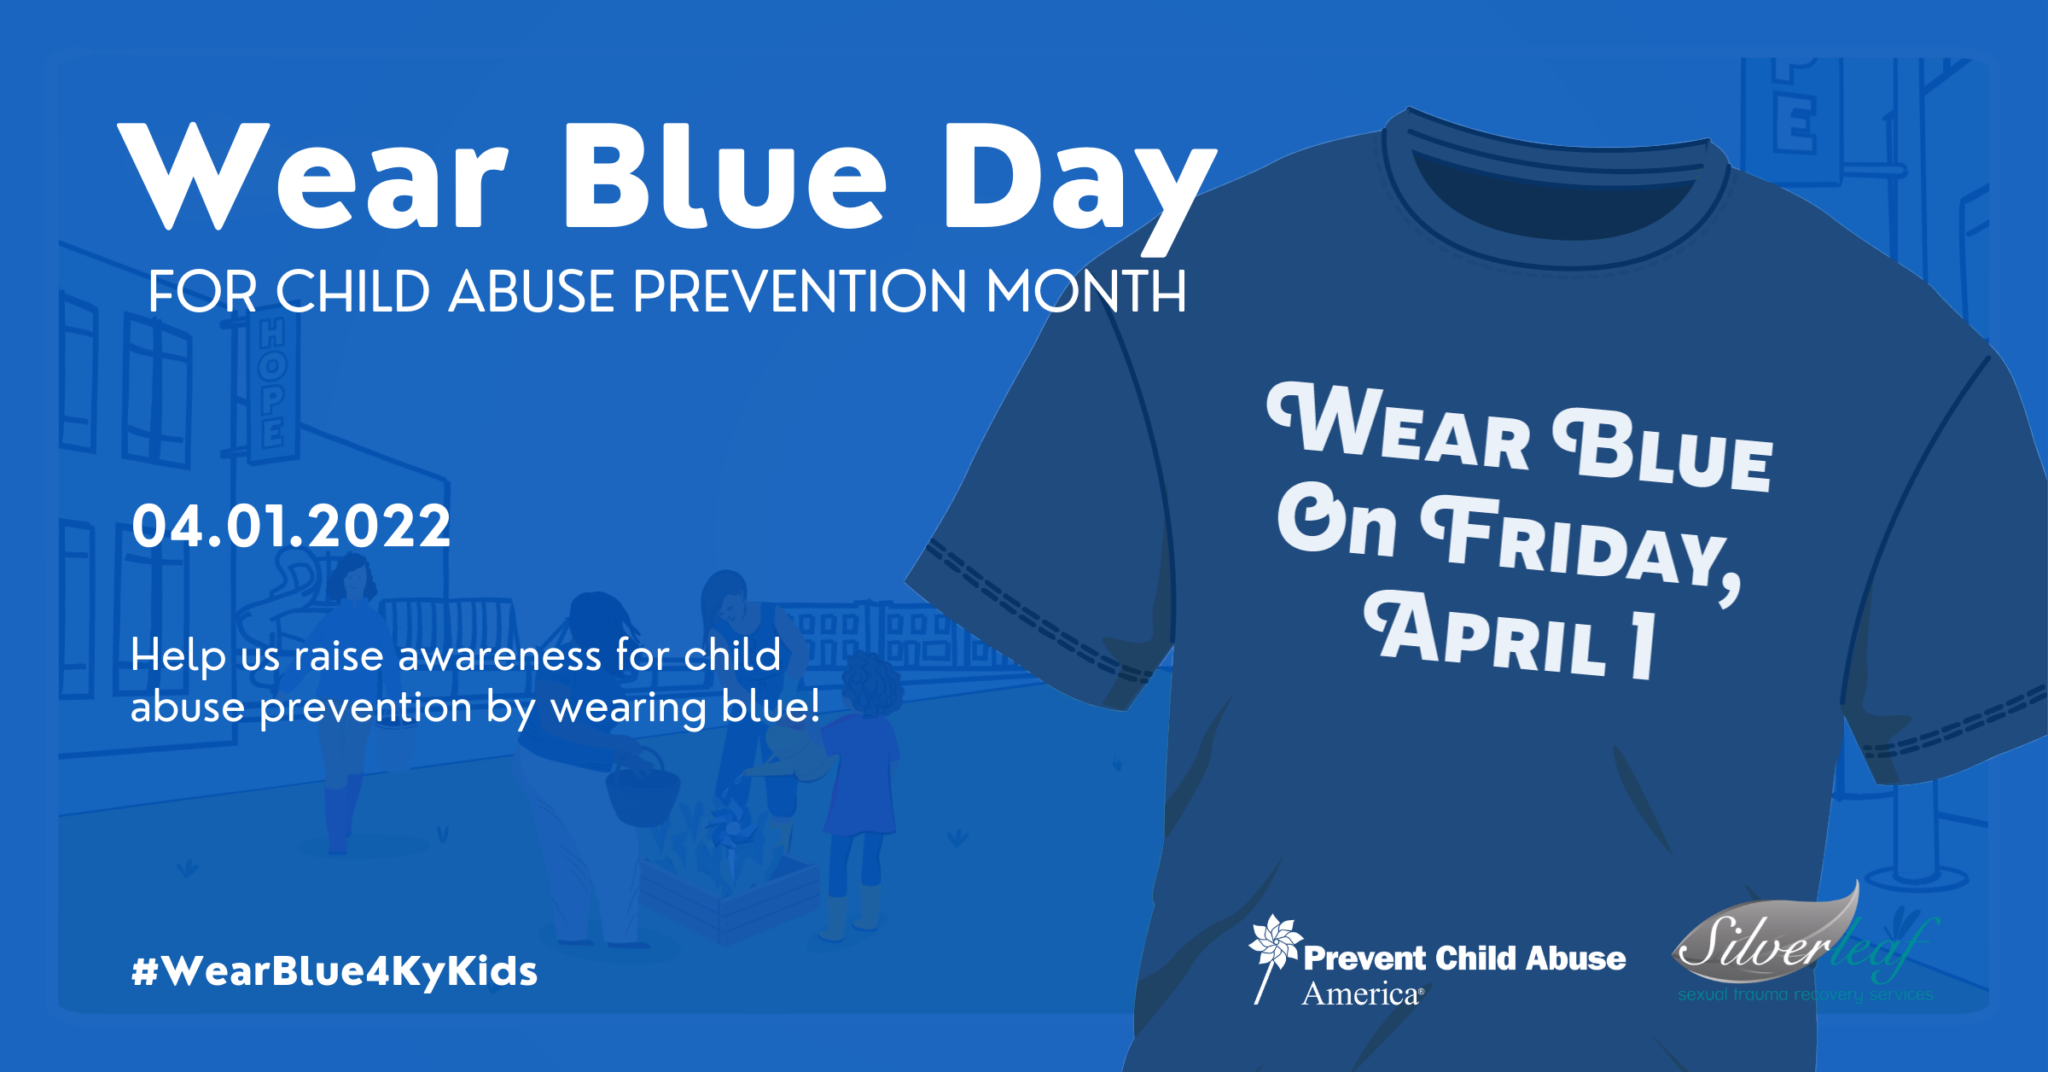 Wear Blue Day for Child Abuse Prevention Month Silverleaf Kentucky